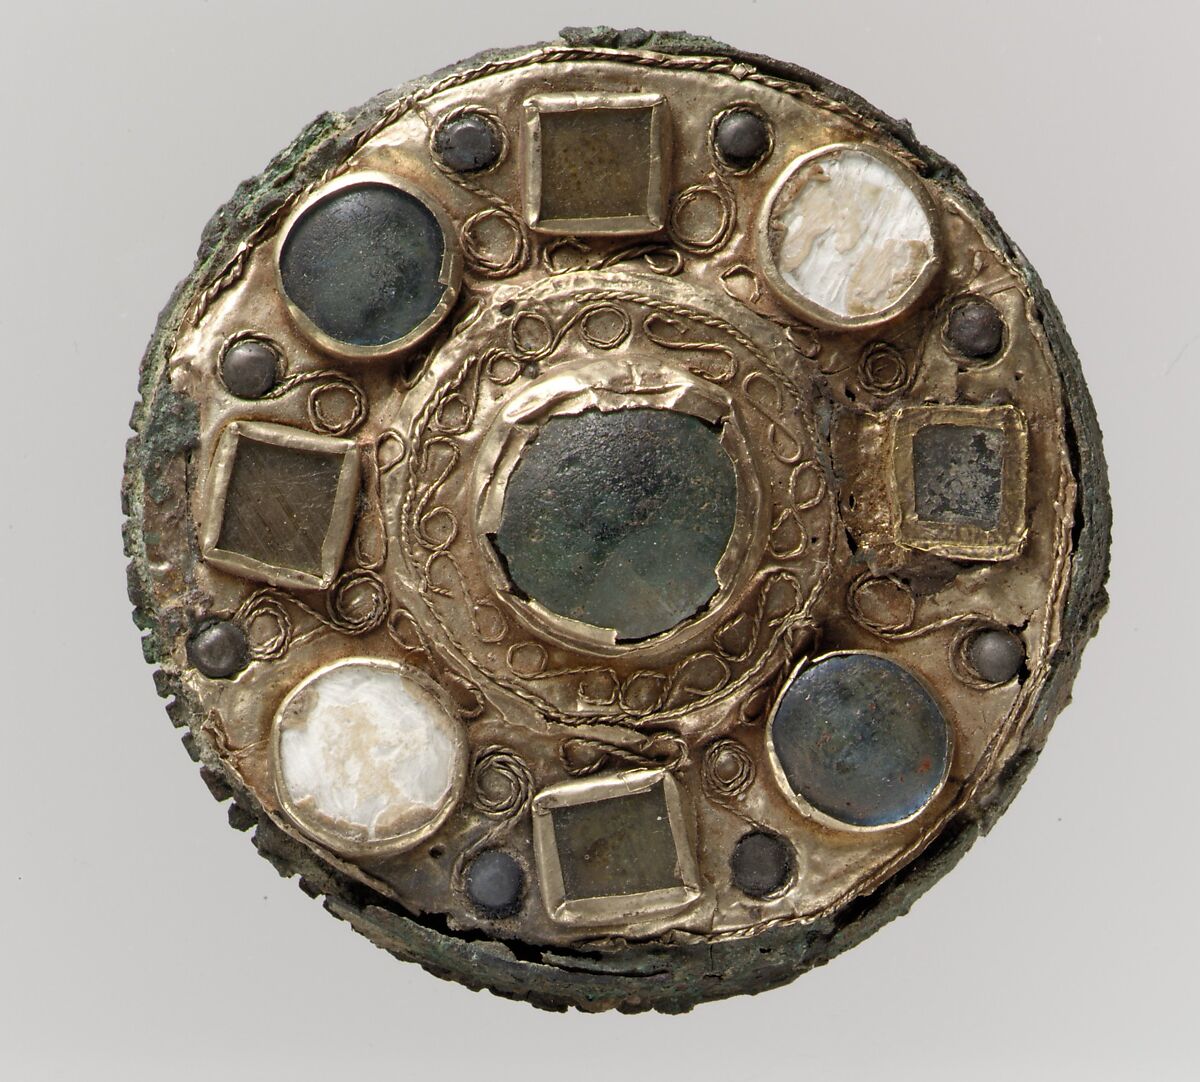 Disk Brooch, Gold, glass, mother-of-pearl, silver-headed rivets; copper alloy, Frankish 